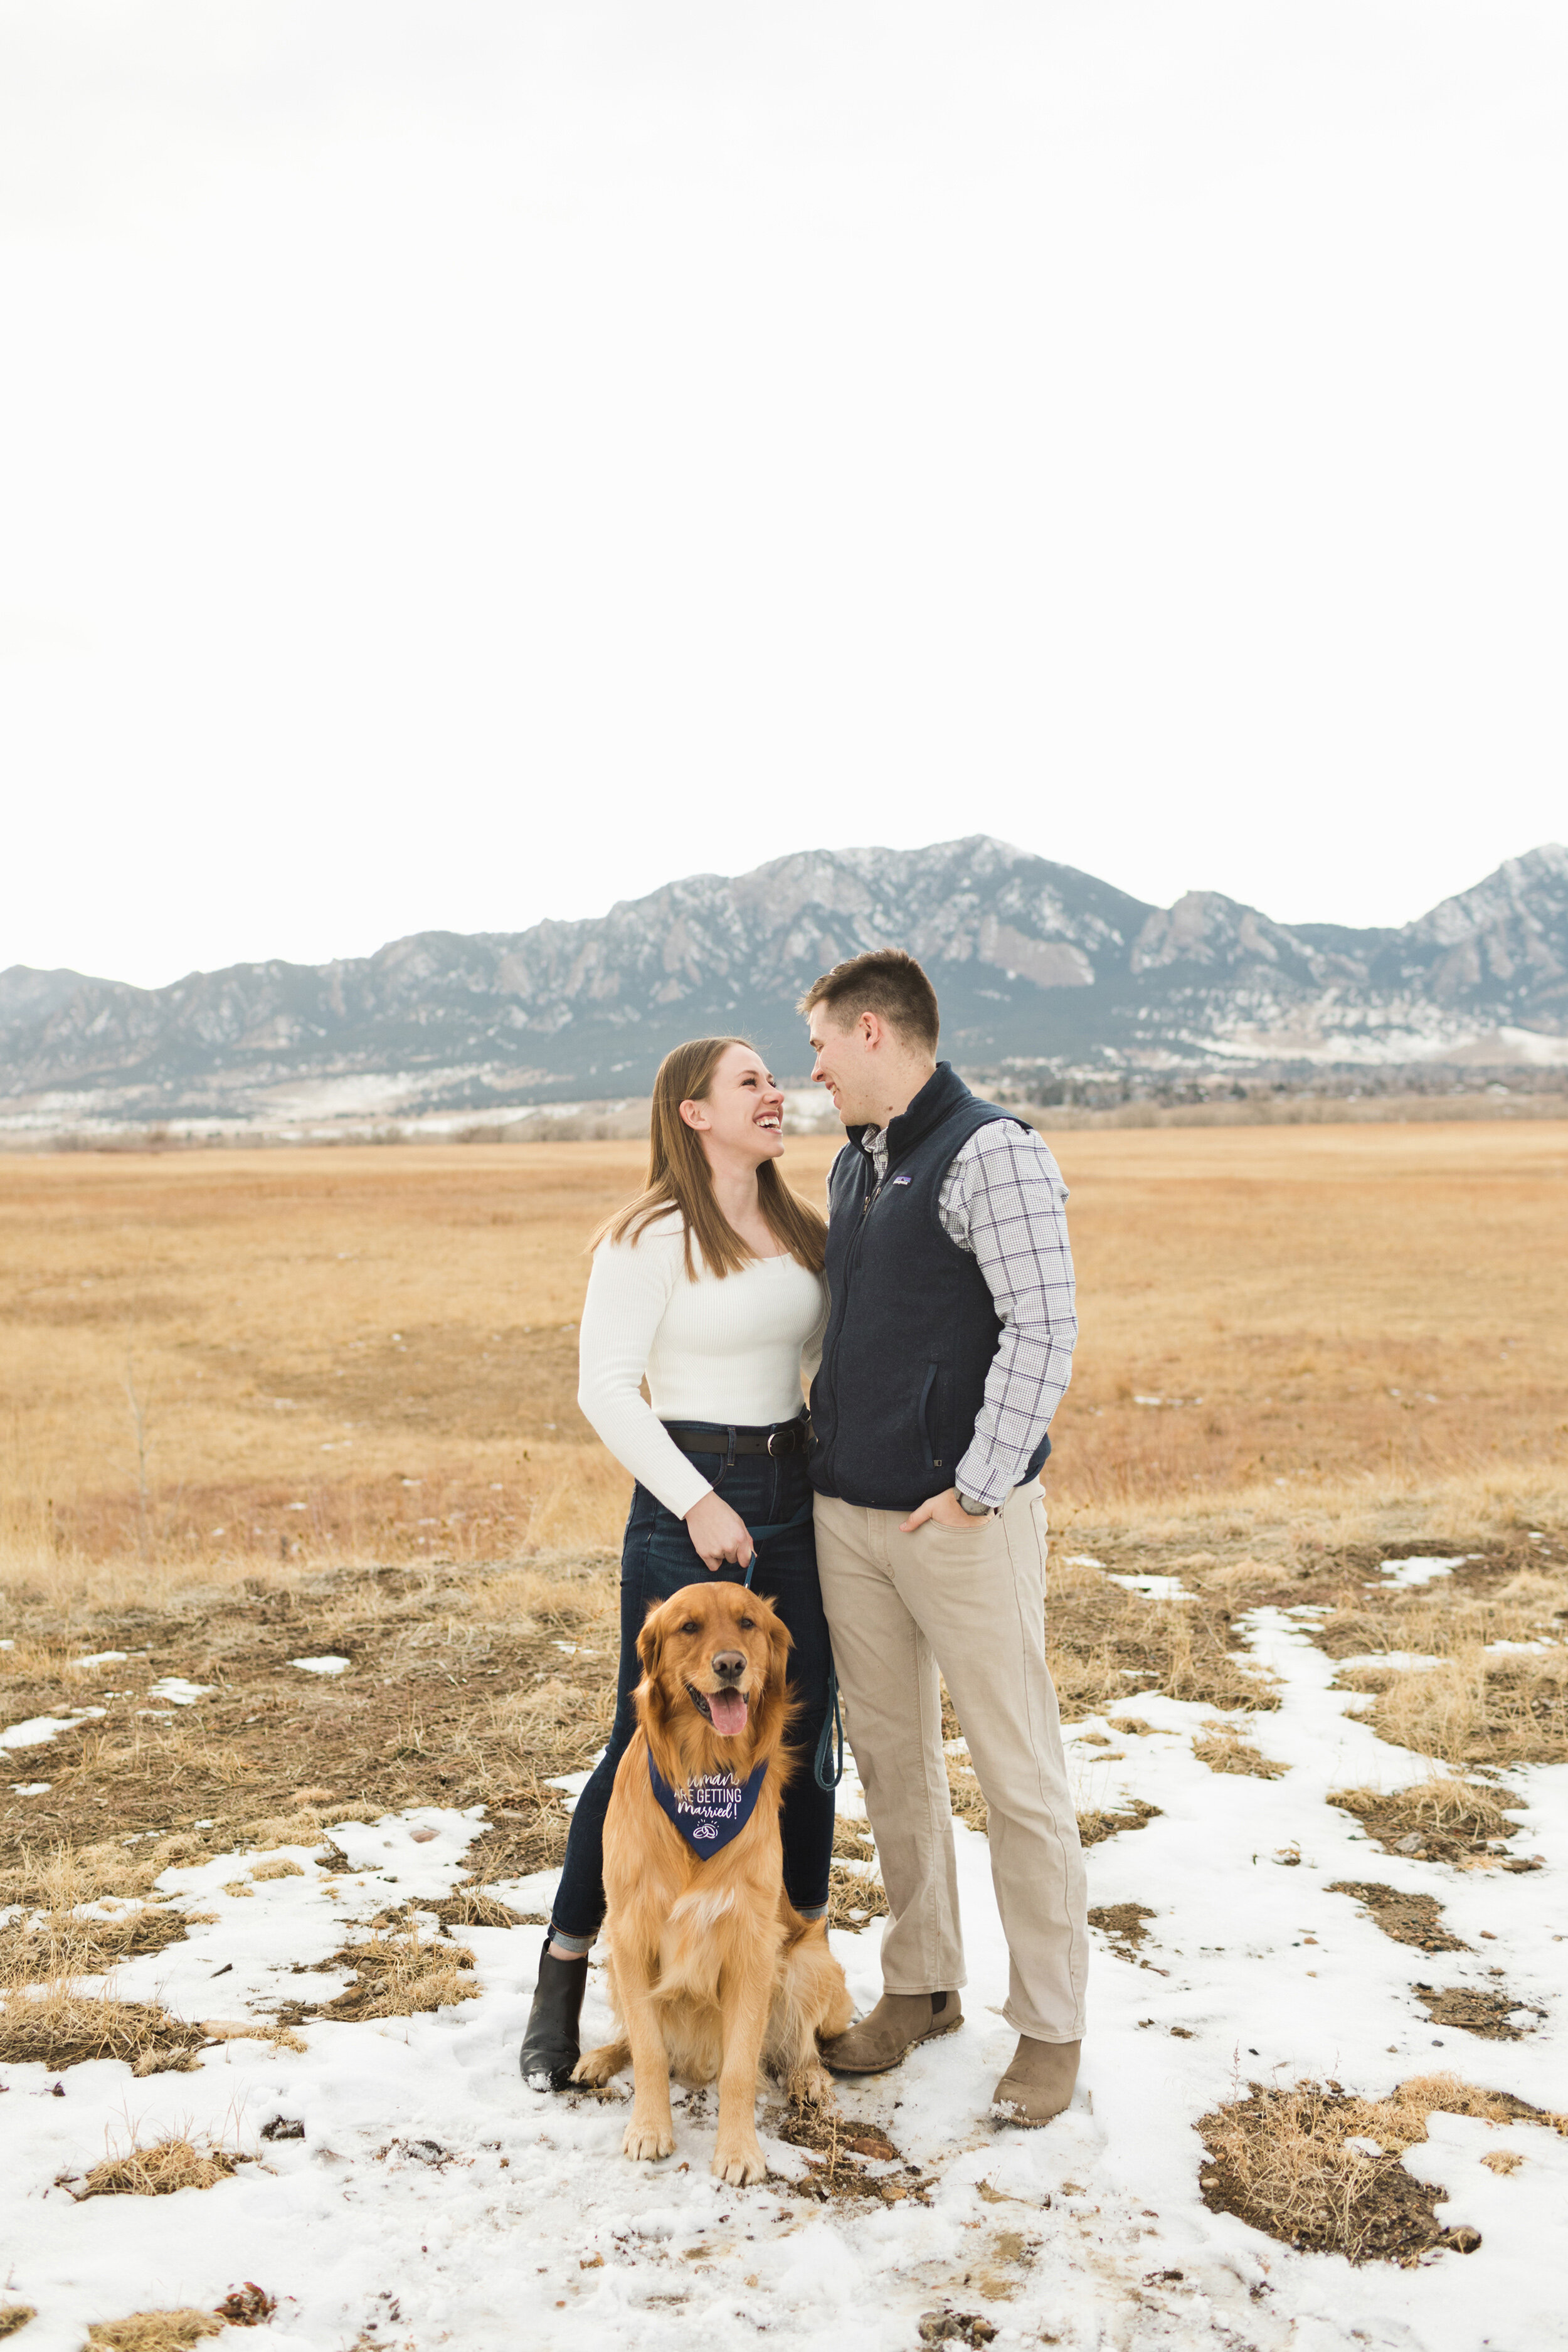 colorado-engagement-photos-in-the-snowy-mountains-02.jpg